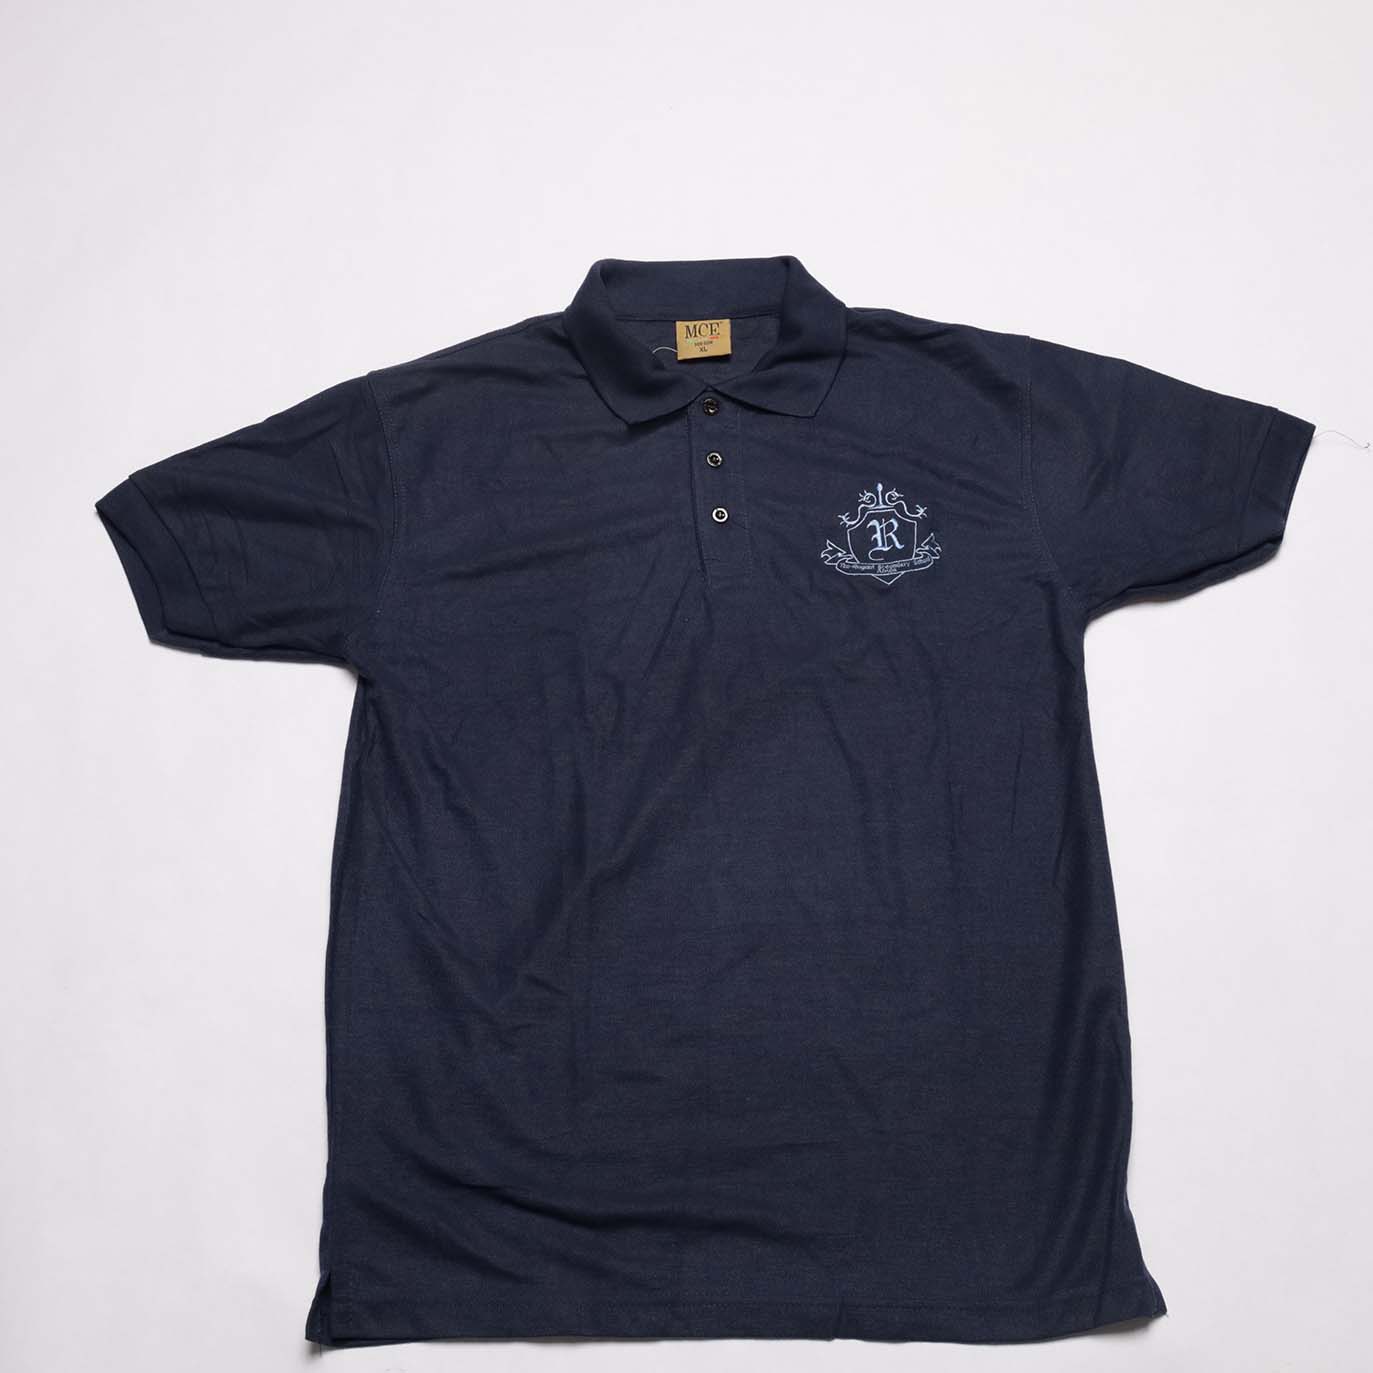 Borders Out-Polo Shirt – The Regent School, Abuja